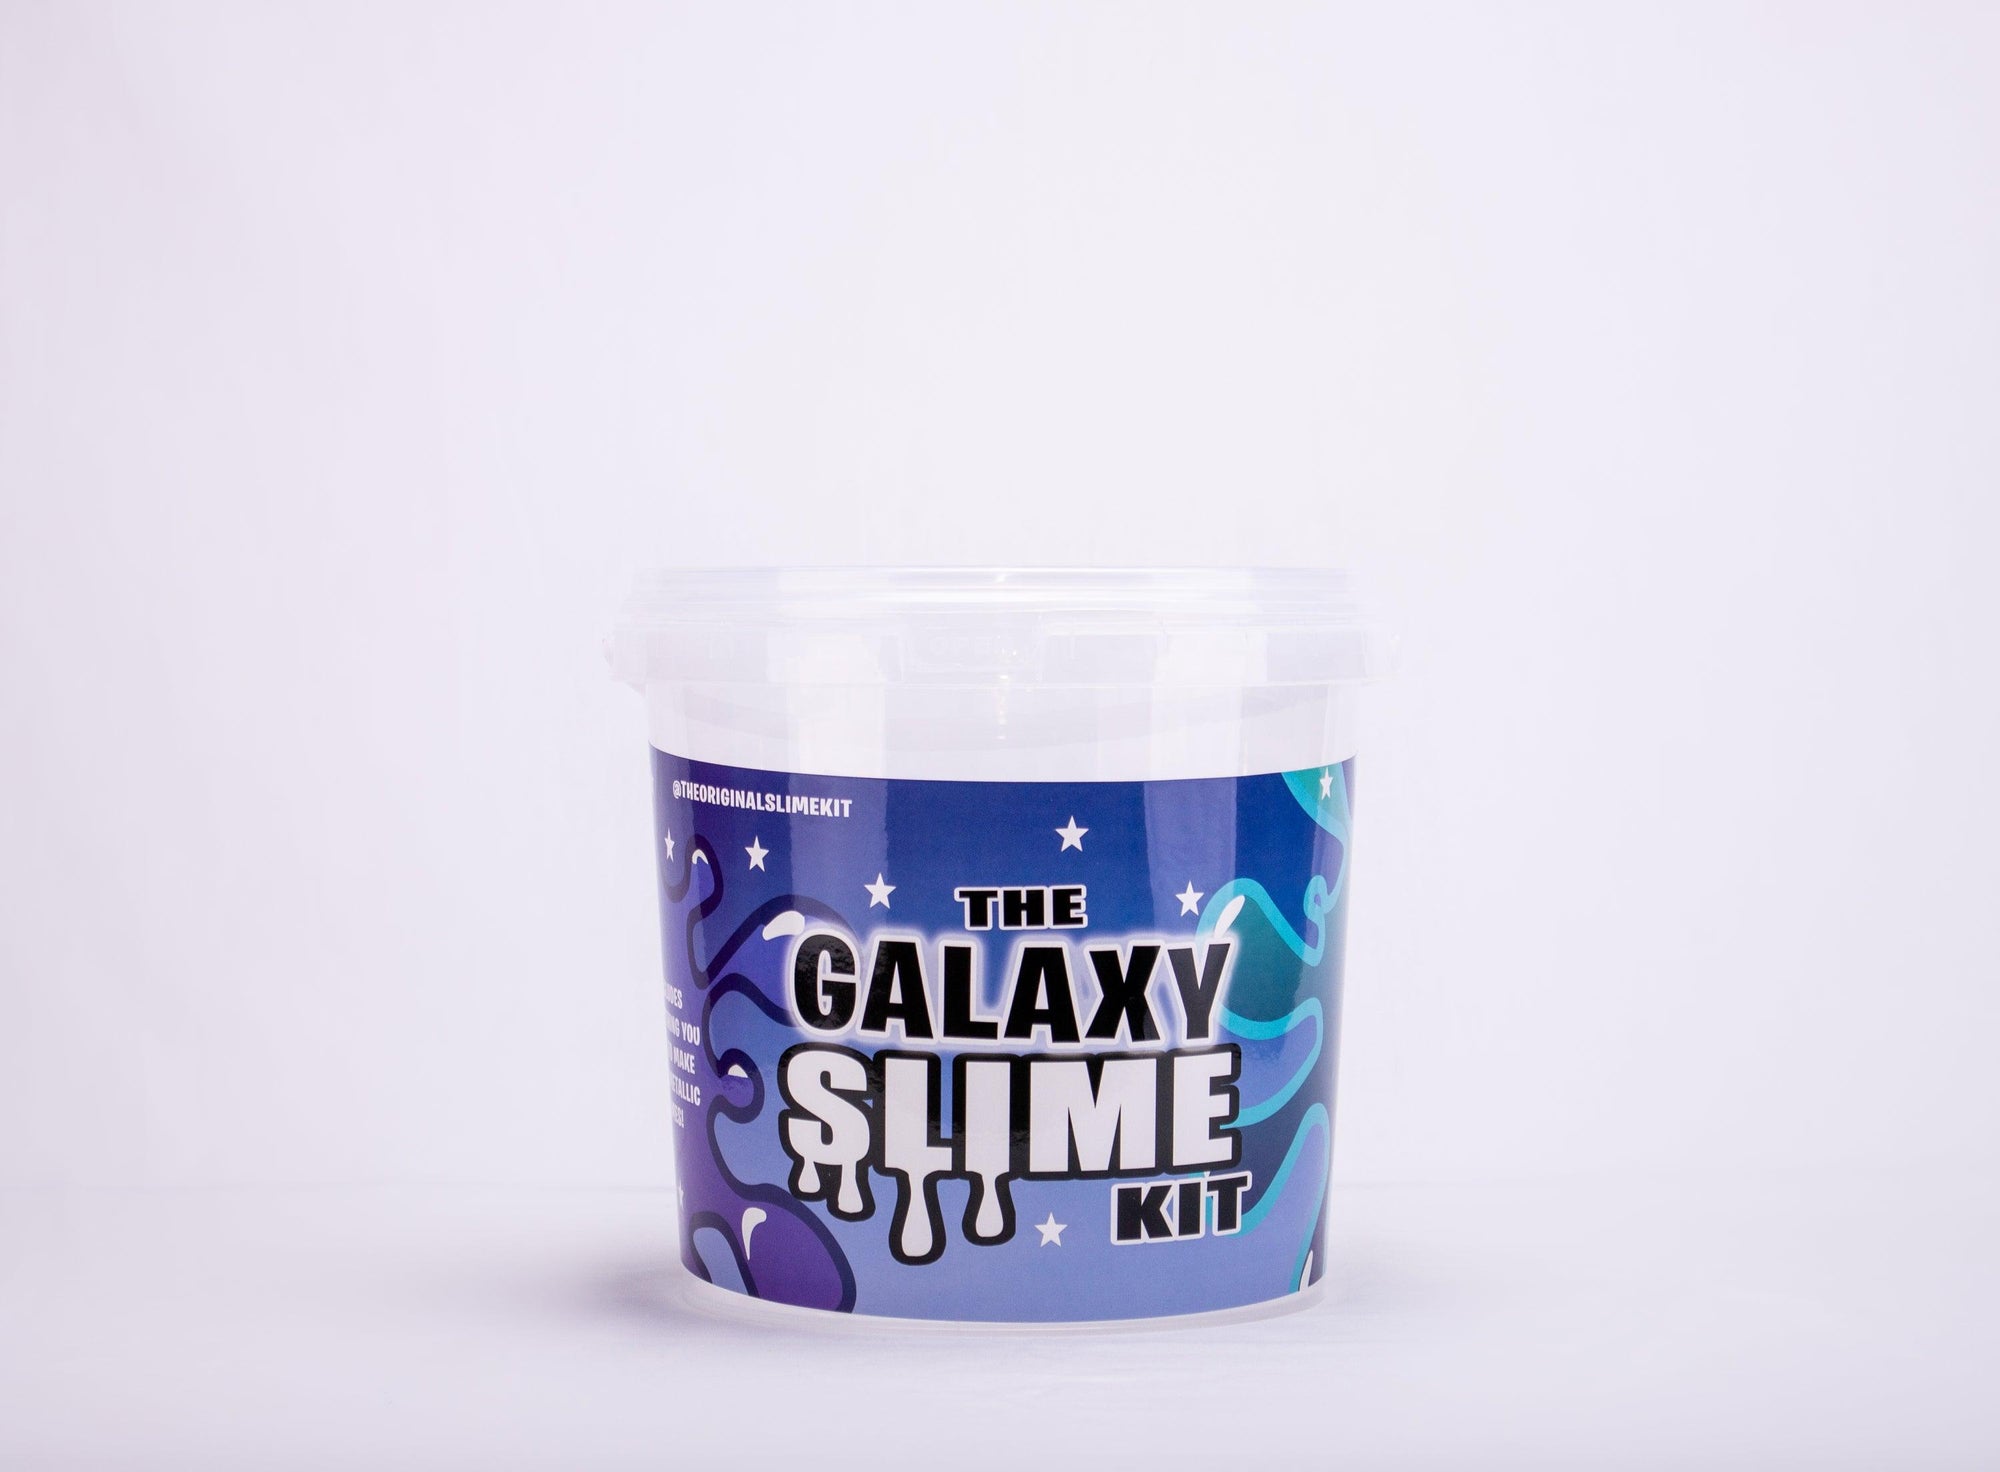 Buy The Party Slime Kit by Slime Kit from Ourkids